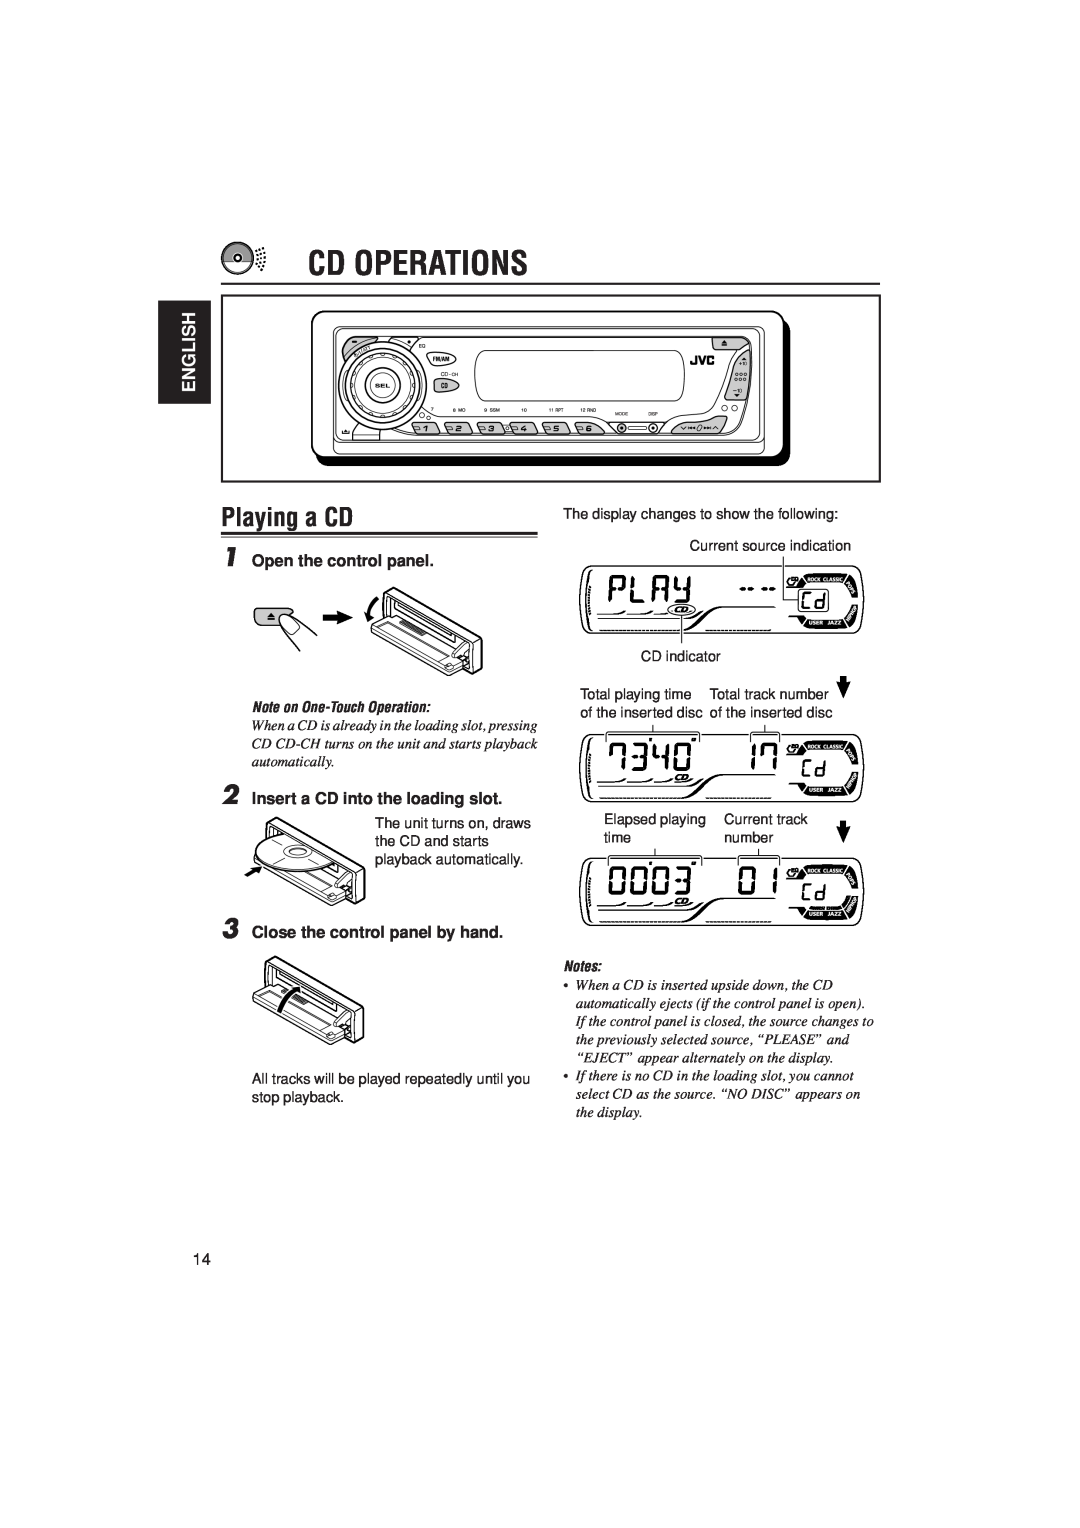 JVC KD-G305 manual Cd Operations, Playing a CD, English, Open the control panel, Insert a CD into the loading slot 